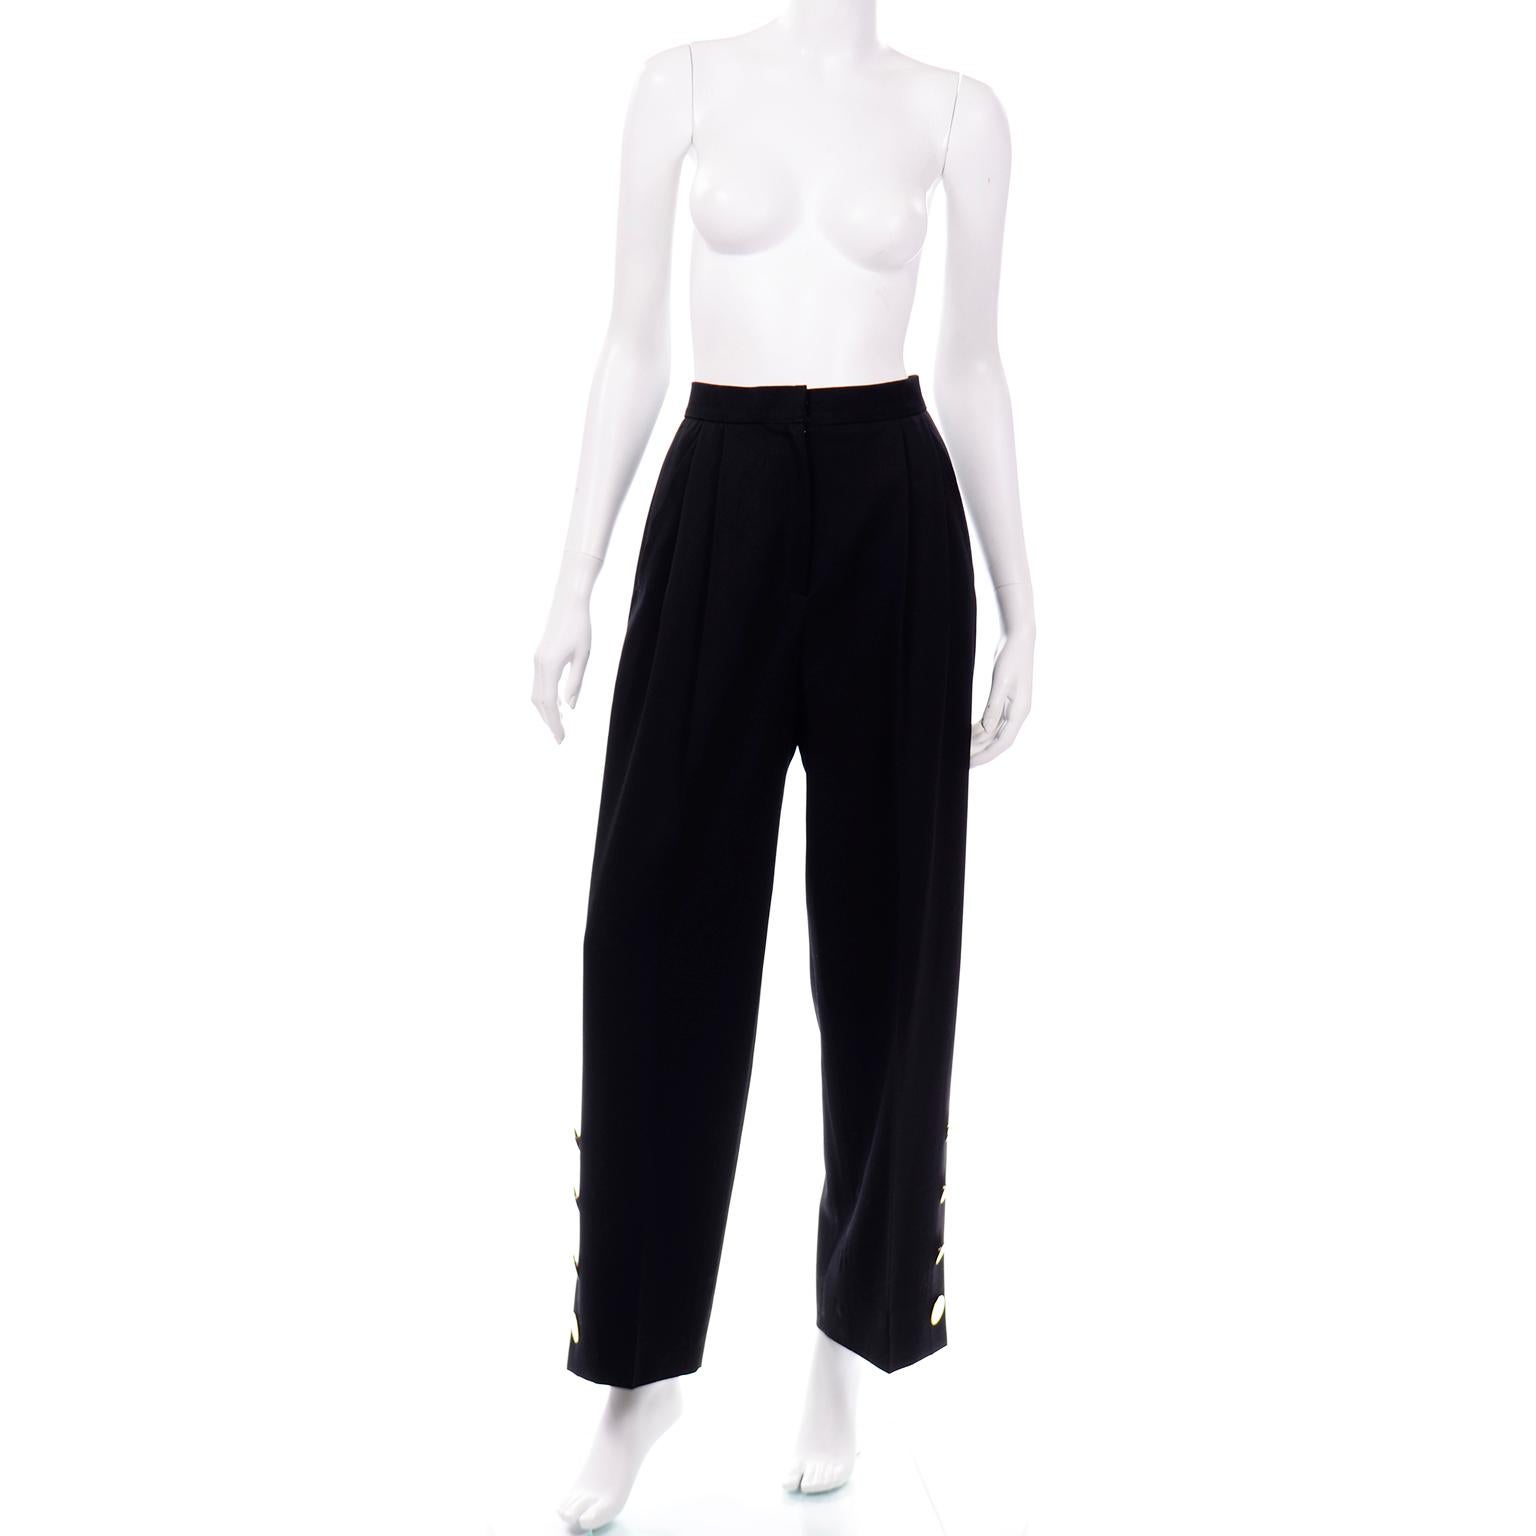 This is a pair of amazing vintage Givenchy high waisted black trousers. Vintage 1980's and 1980's pants make great additions to any modern wardrobe! We love the unique detail on these particular pants of large gold tone buttons on the sides of the